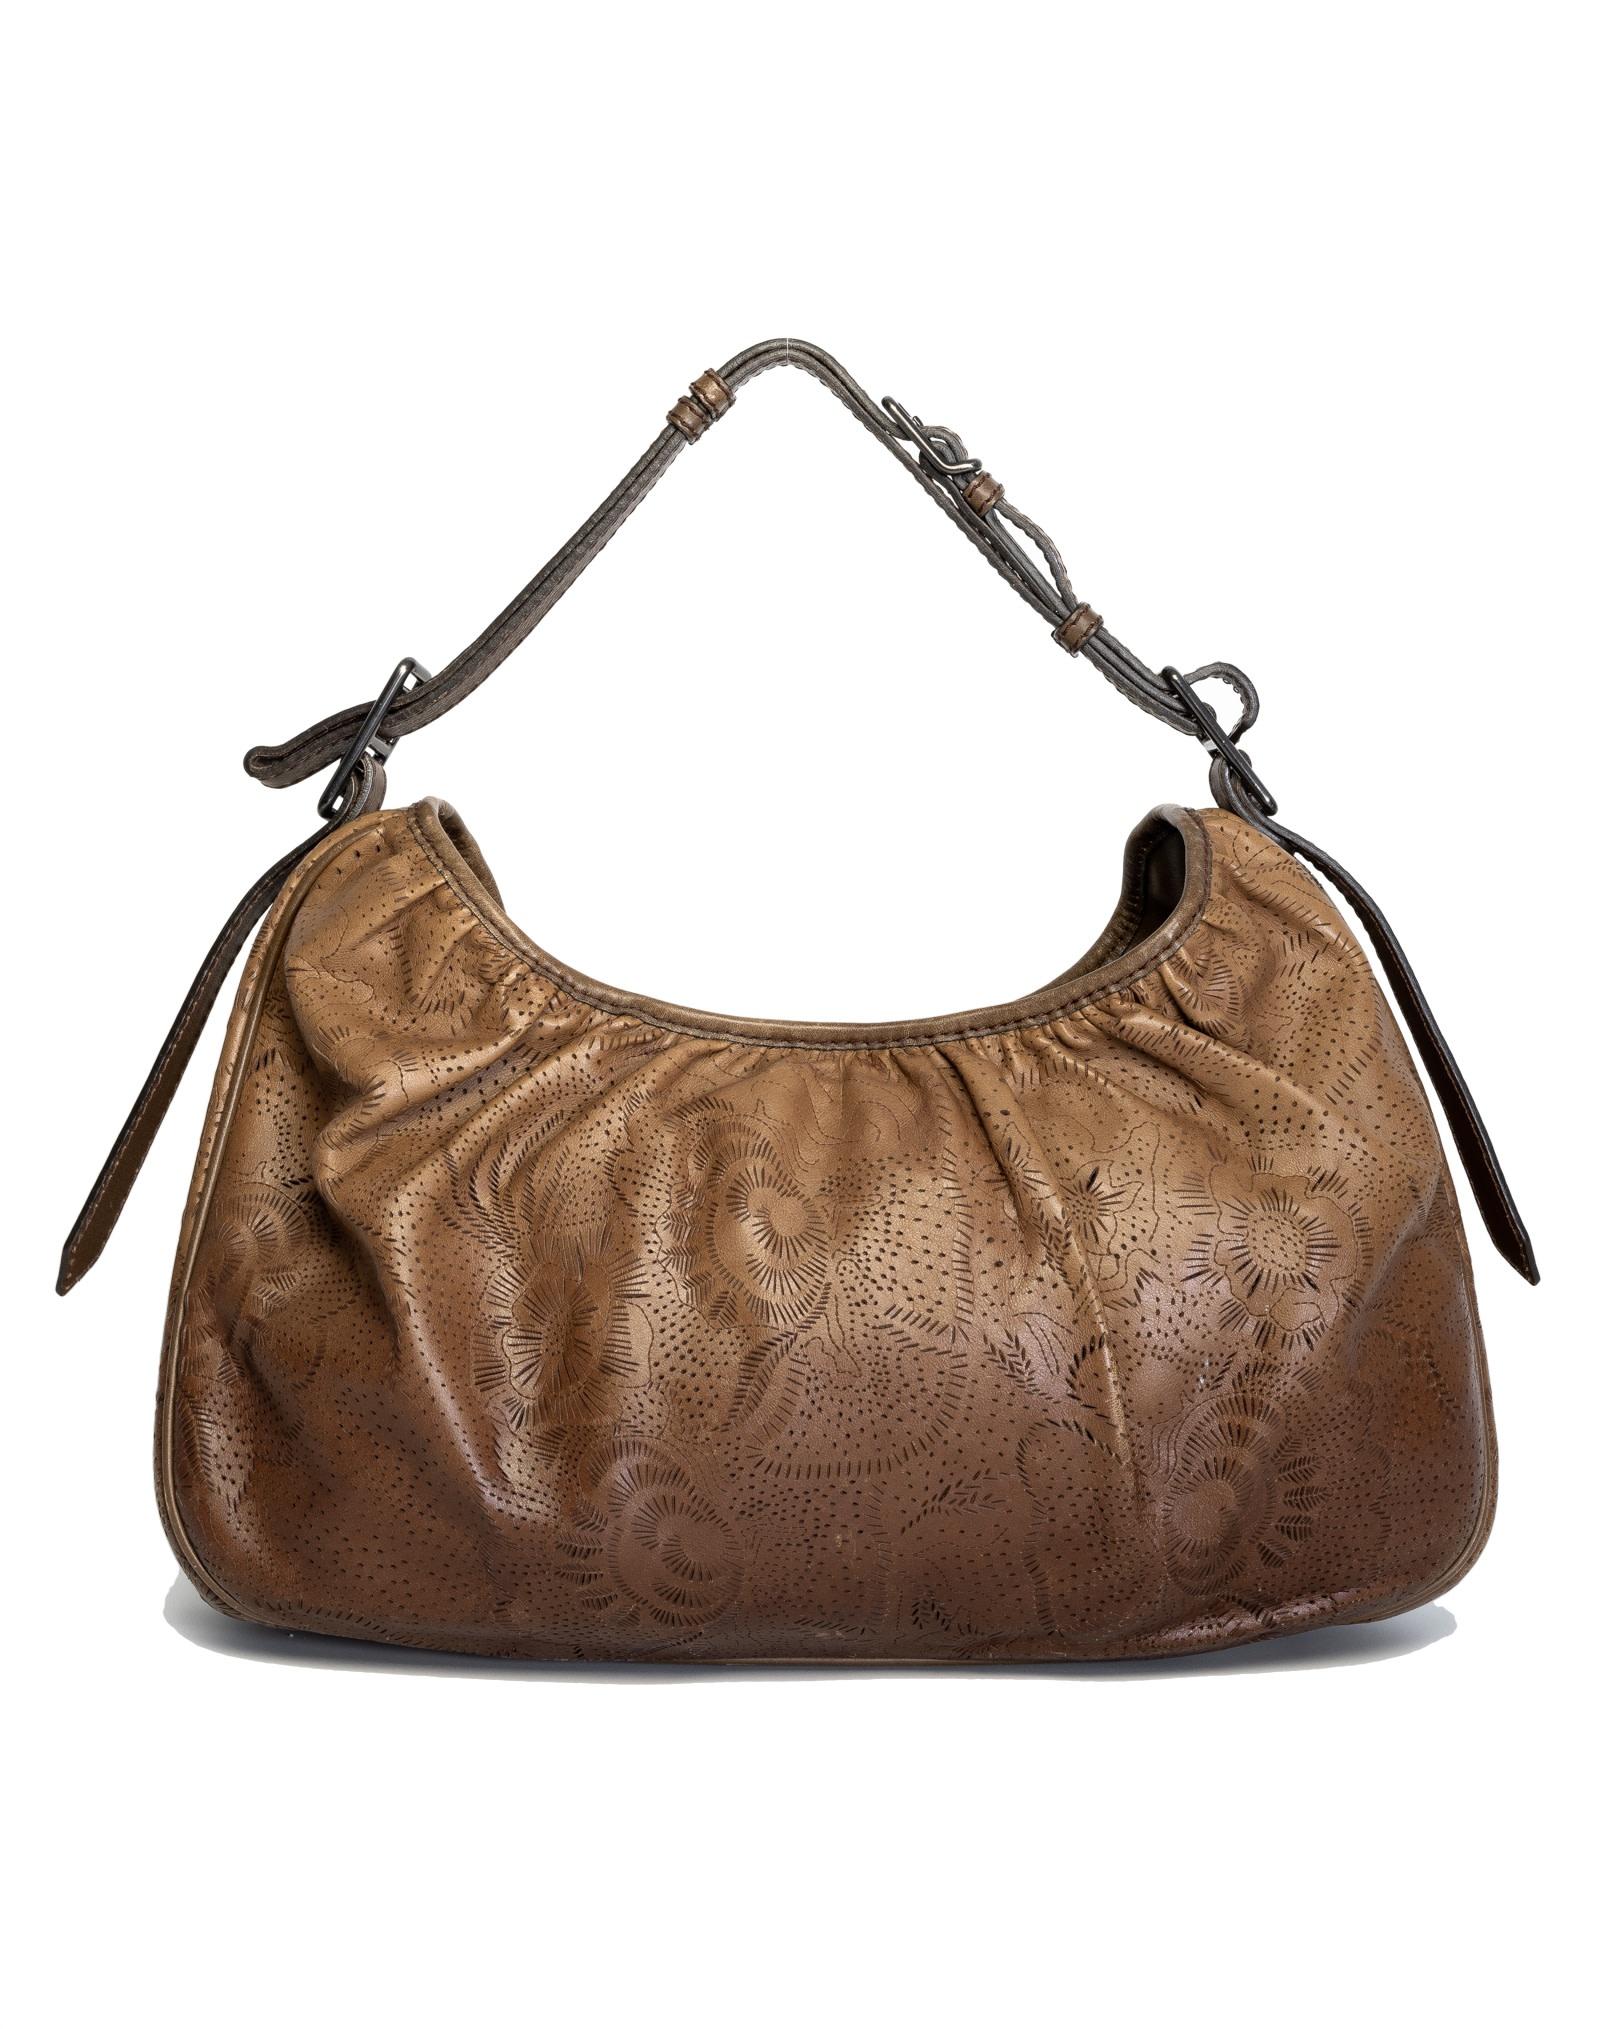 Burberry Hobo bag made of leather with laser-cut floral detailing, adjustable shoulder strap, top zipper closure and an open interior with nylon lining and zip and slip pockets. 

COLOR:  Brown
MATERIAL: Laser cut leather 
ITEM CODE: